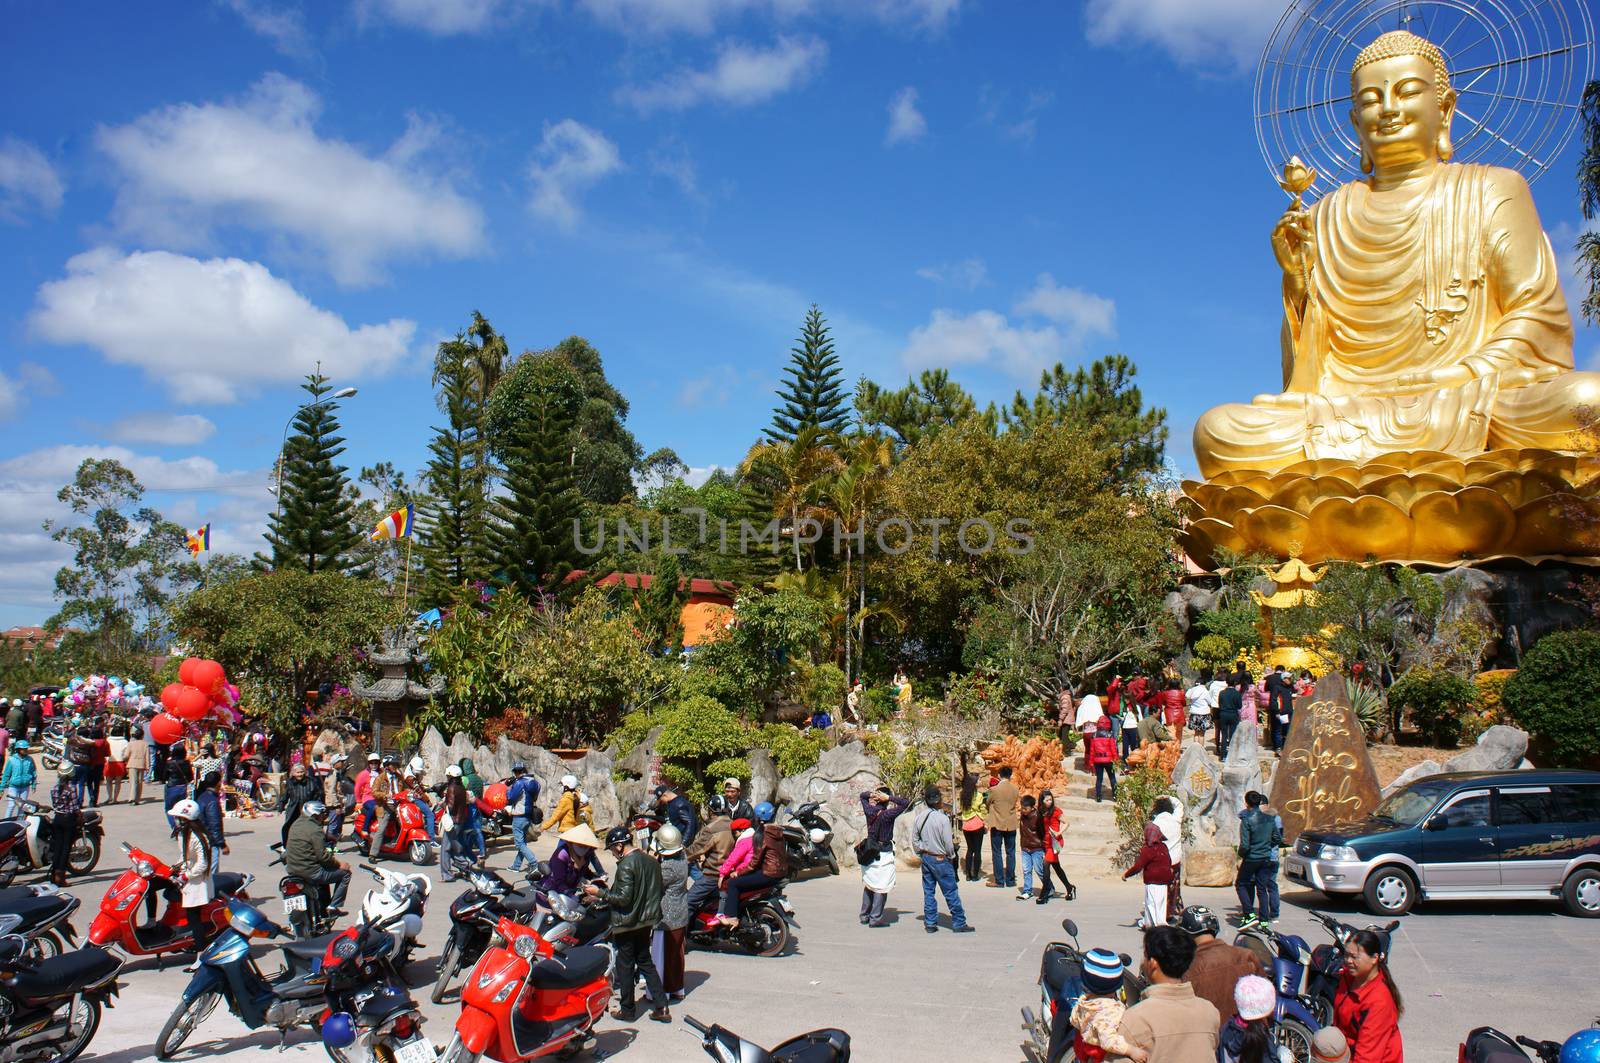 DA LAT, VIETNAM- JAN 31: People go to pagoda to pray lucky, yellow statue of buddha in blue sky, crowd of buddhist visit with belief, faith in buddhism, is traditional culture, viet Nam, Jan 31, 2014